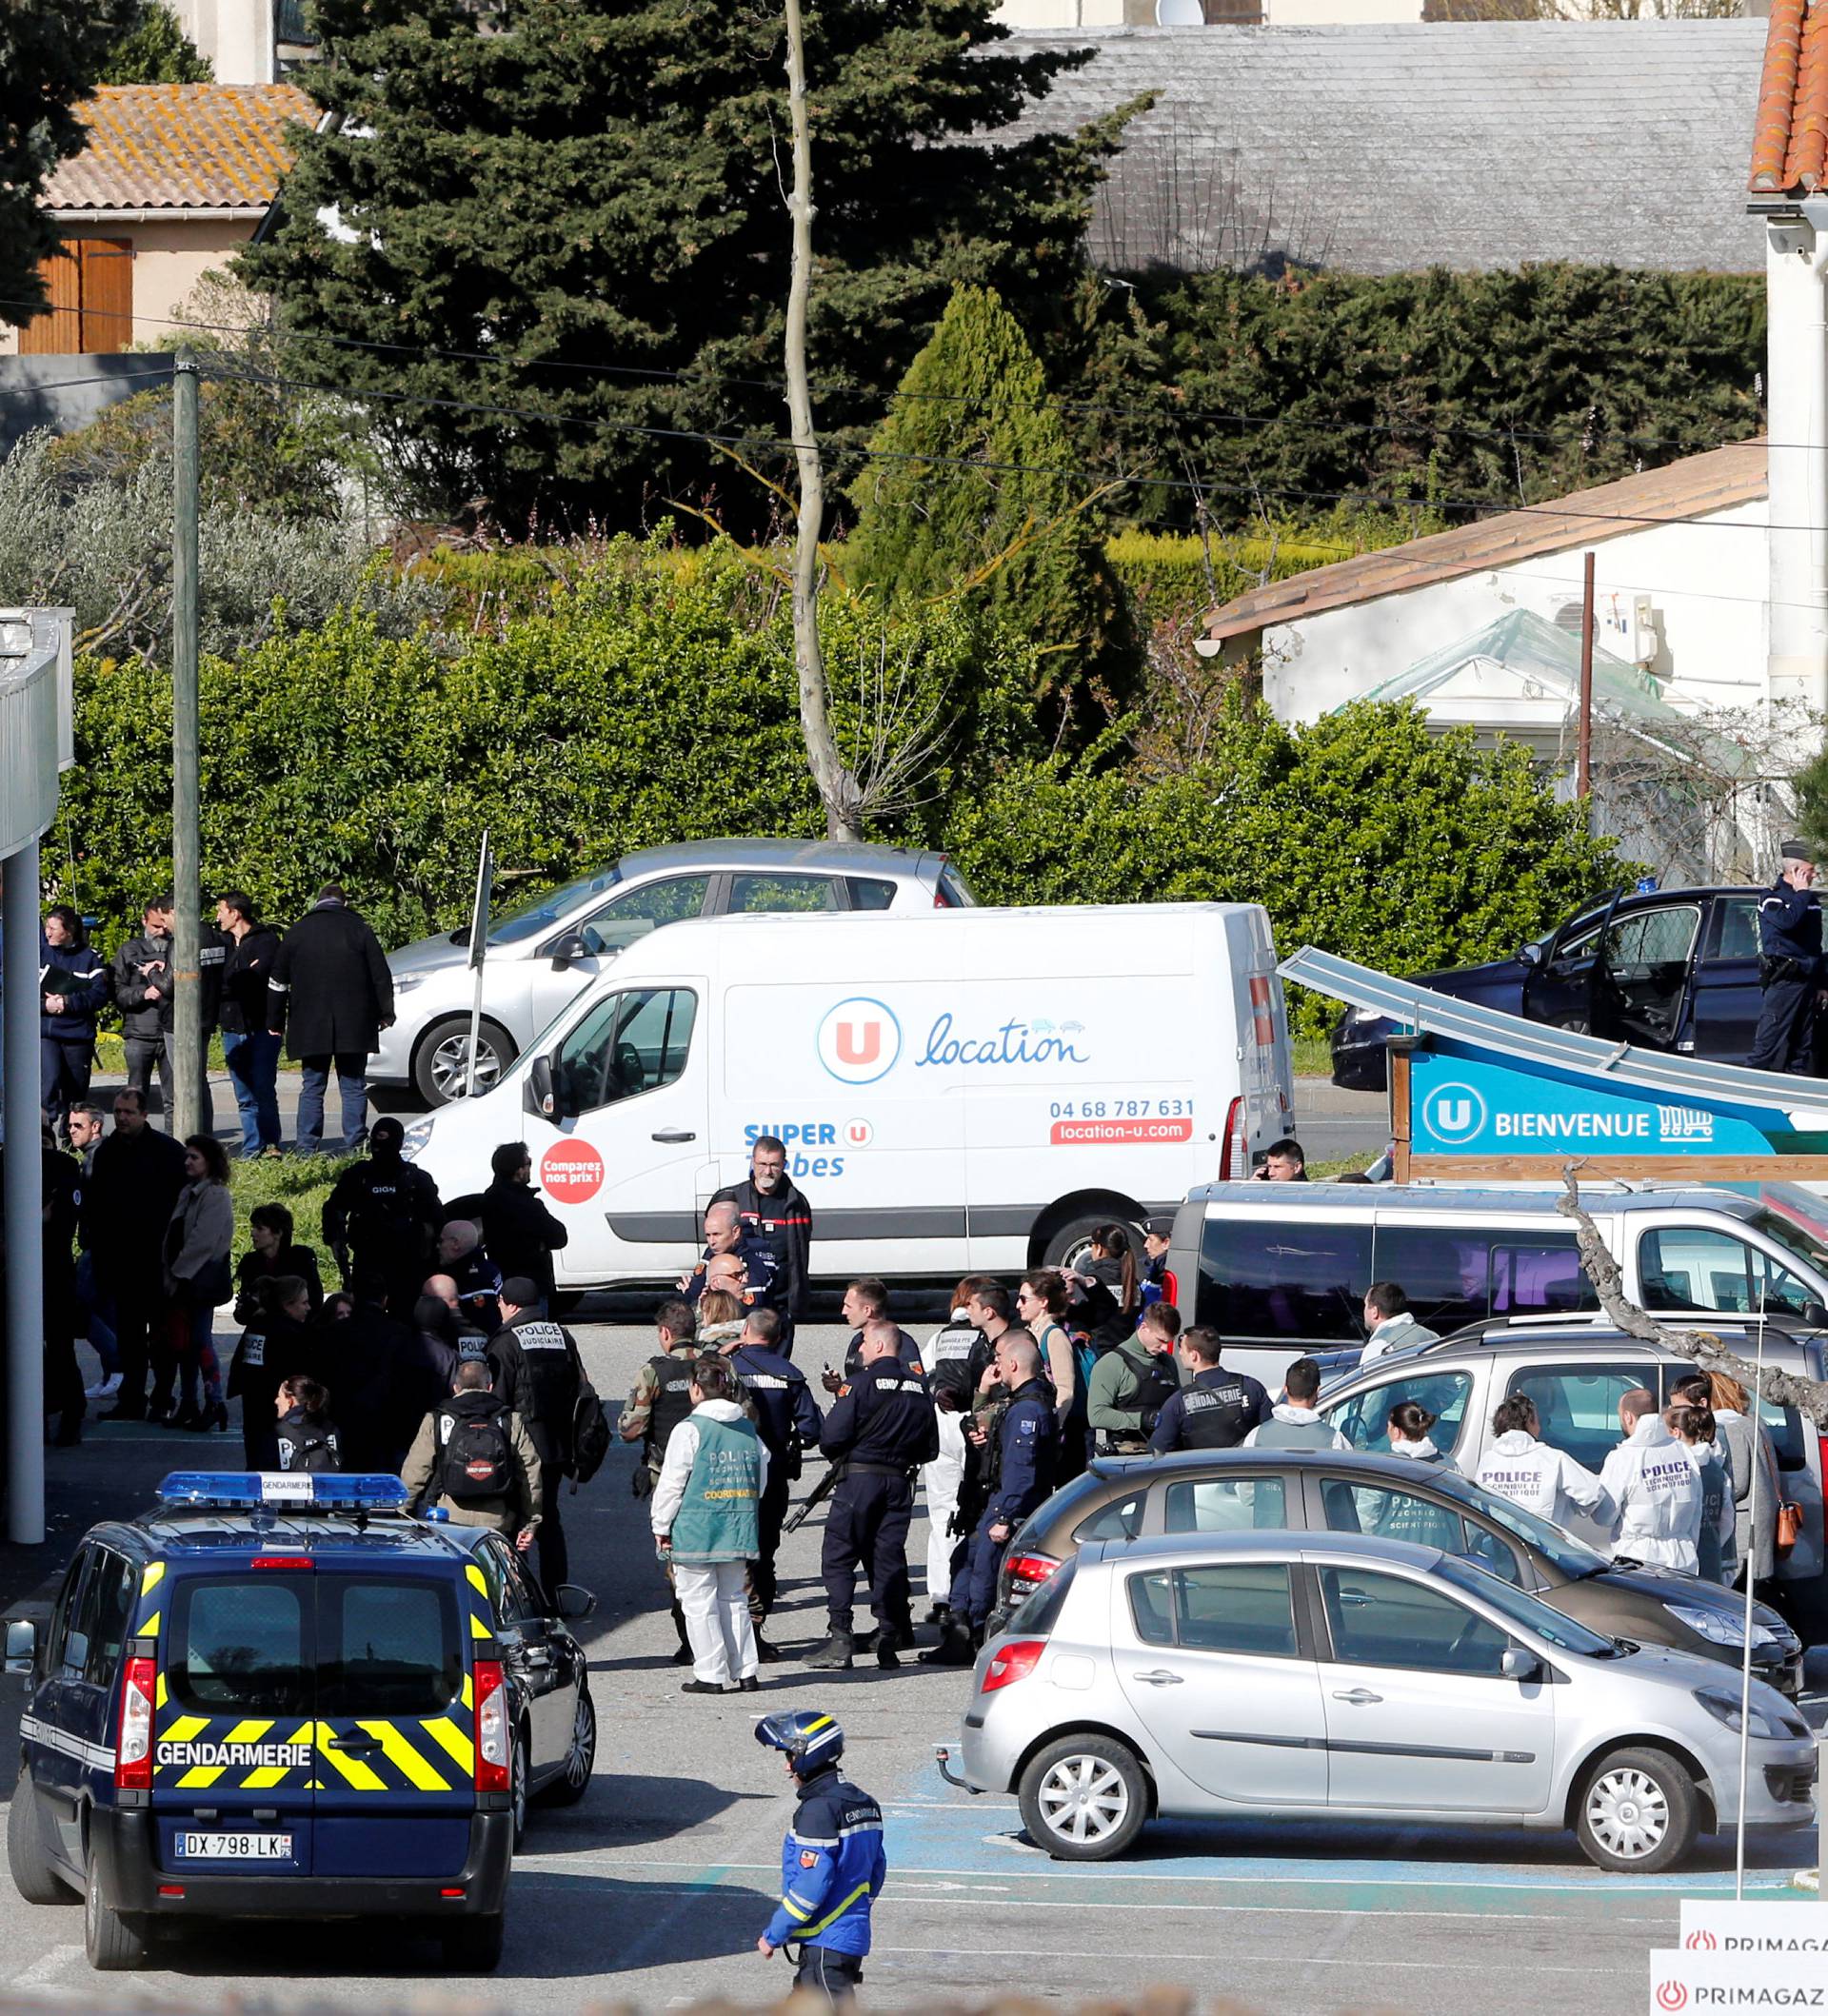 A general view shows gendarmes and police officers at a supermarket after a hostage situation in Trebes